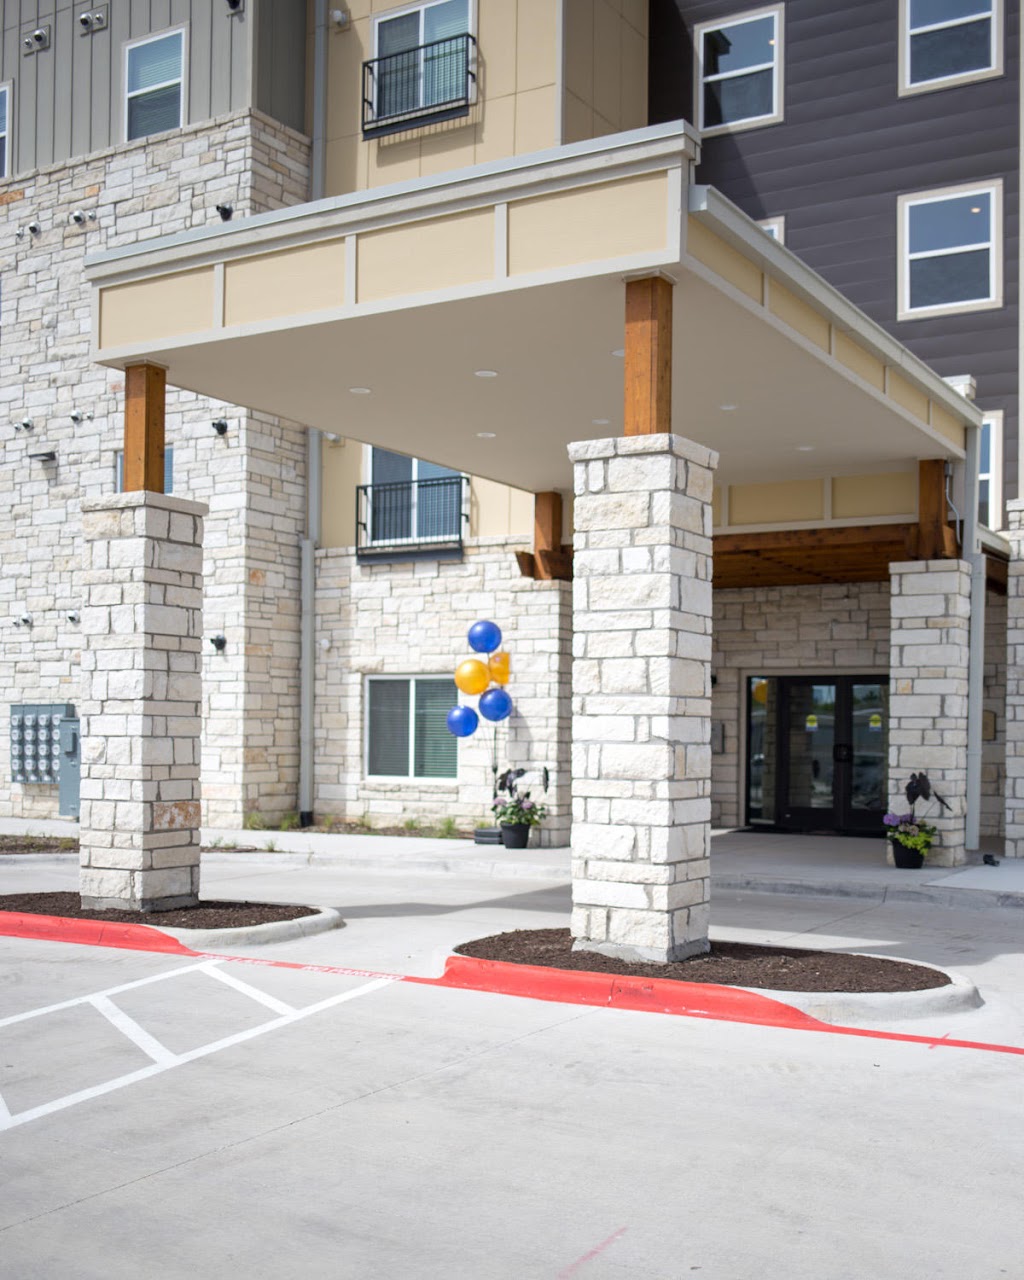 Photo of COMMONS AT GOODNIGHT. Affordable housing located at 2022 EAST SLAUGHTER LANE AUSTIN, TX 78747